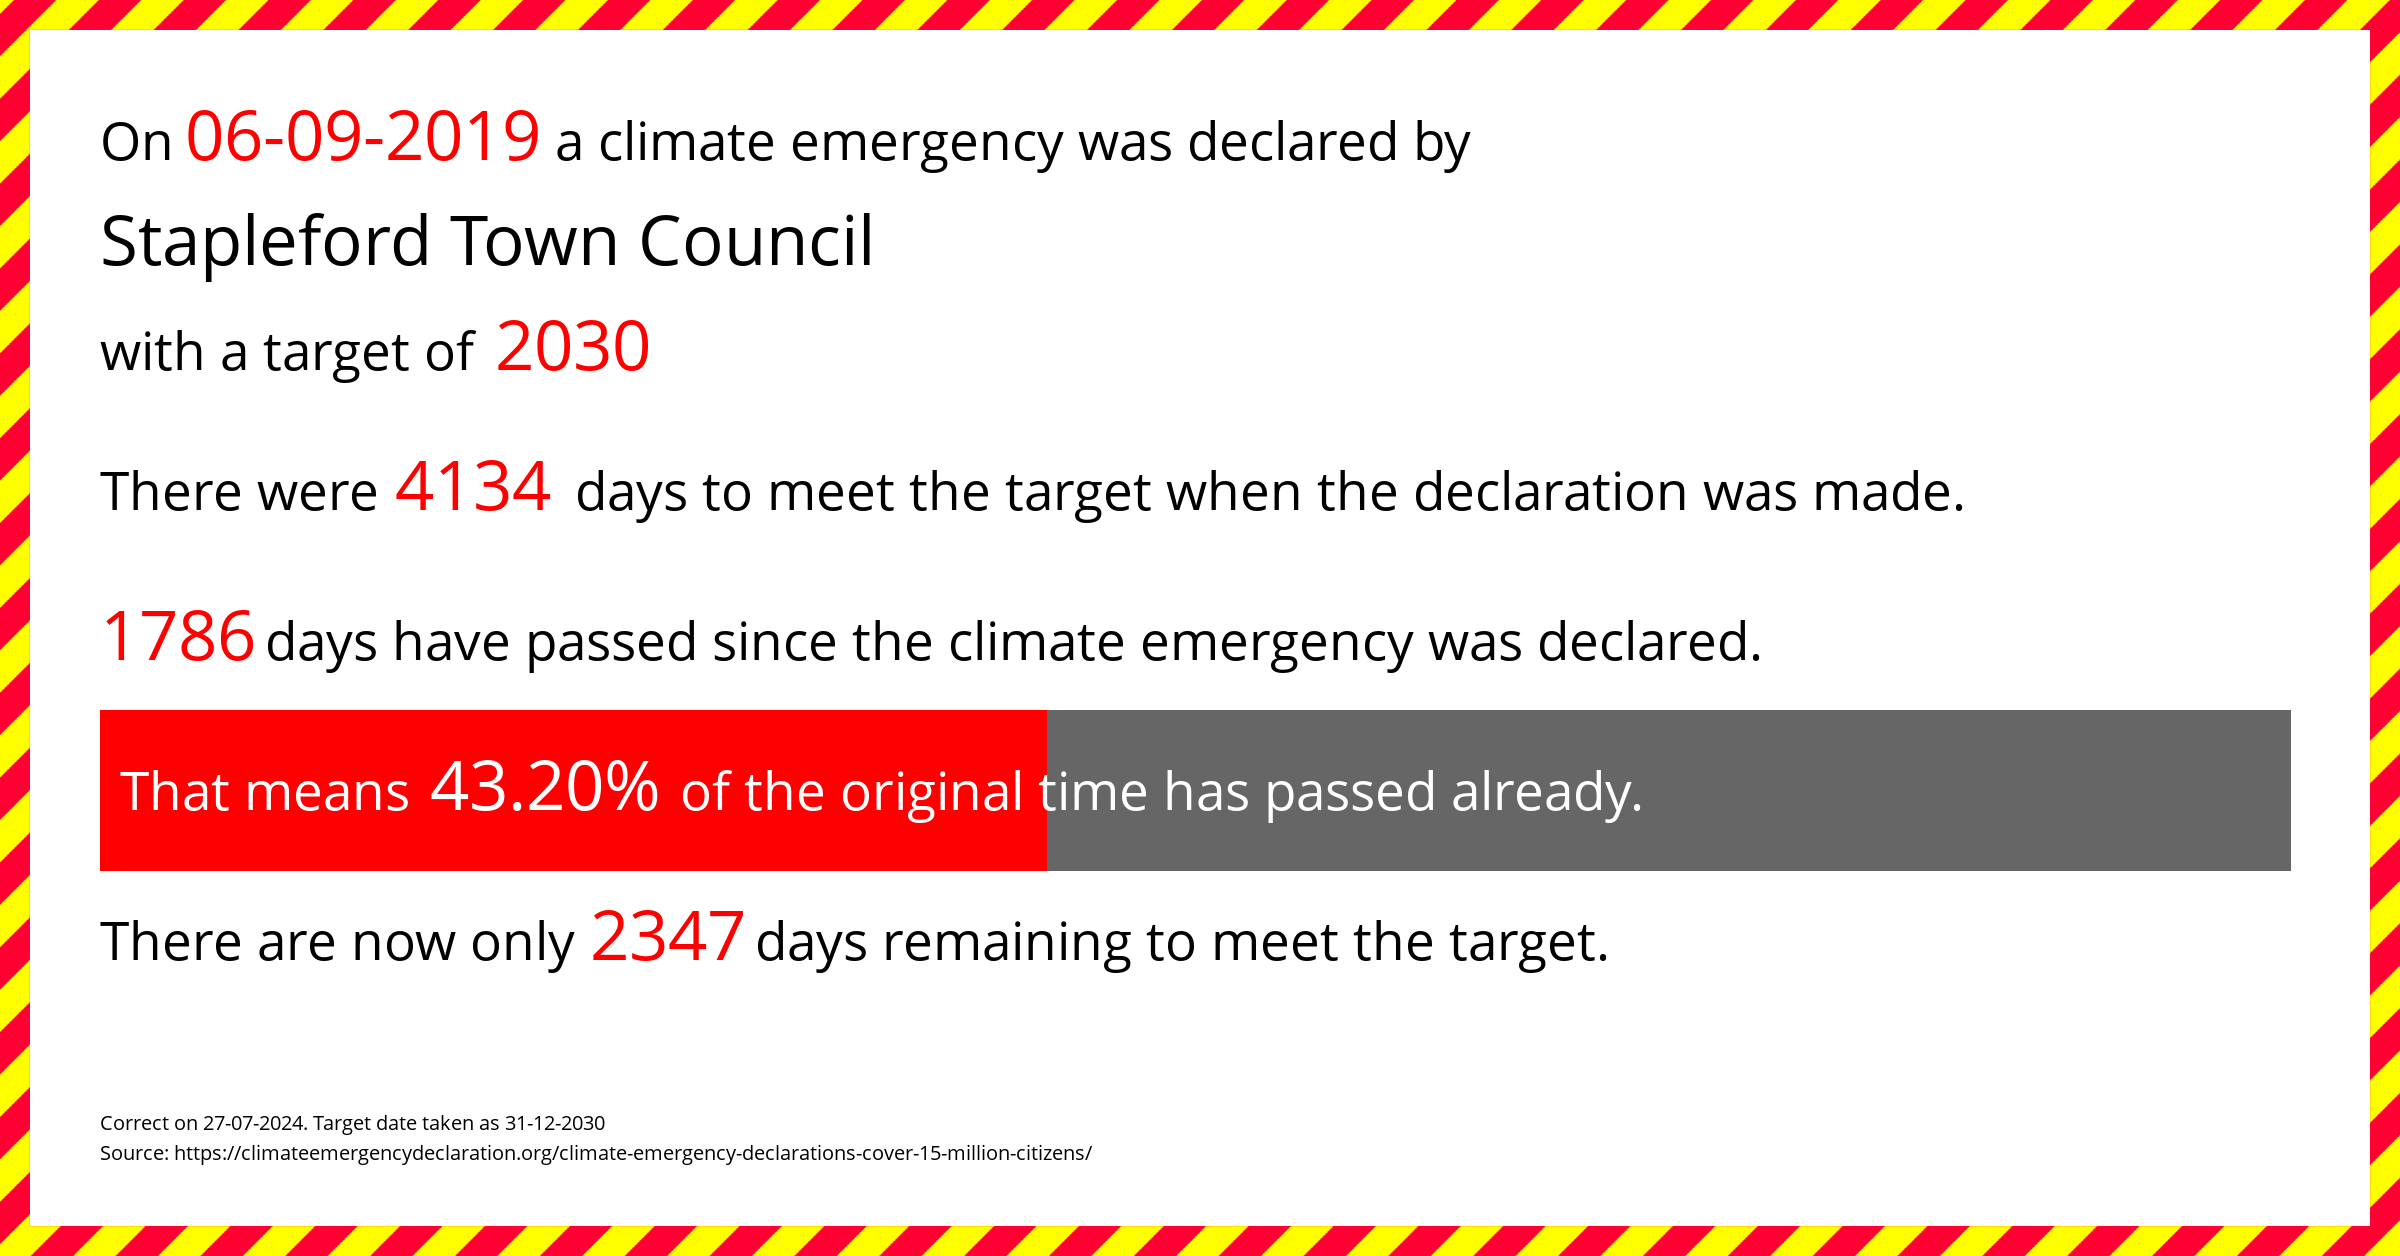 Stapleford Town Council declared a Climate emergency on Friday 6th September 2019, with a target of 2030.